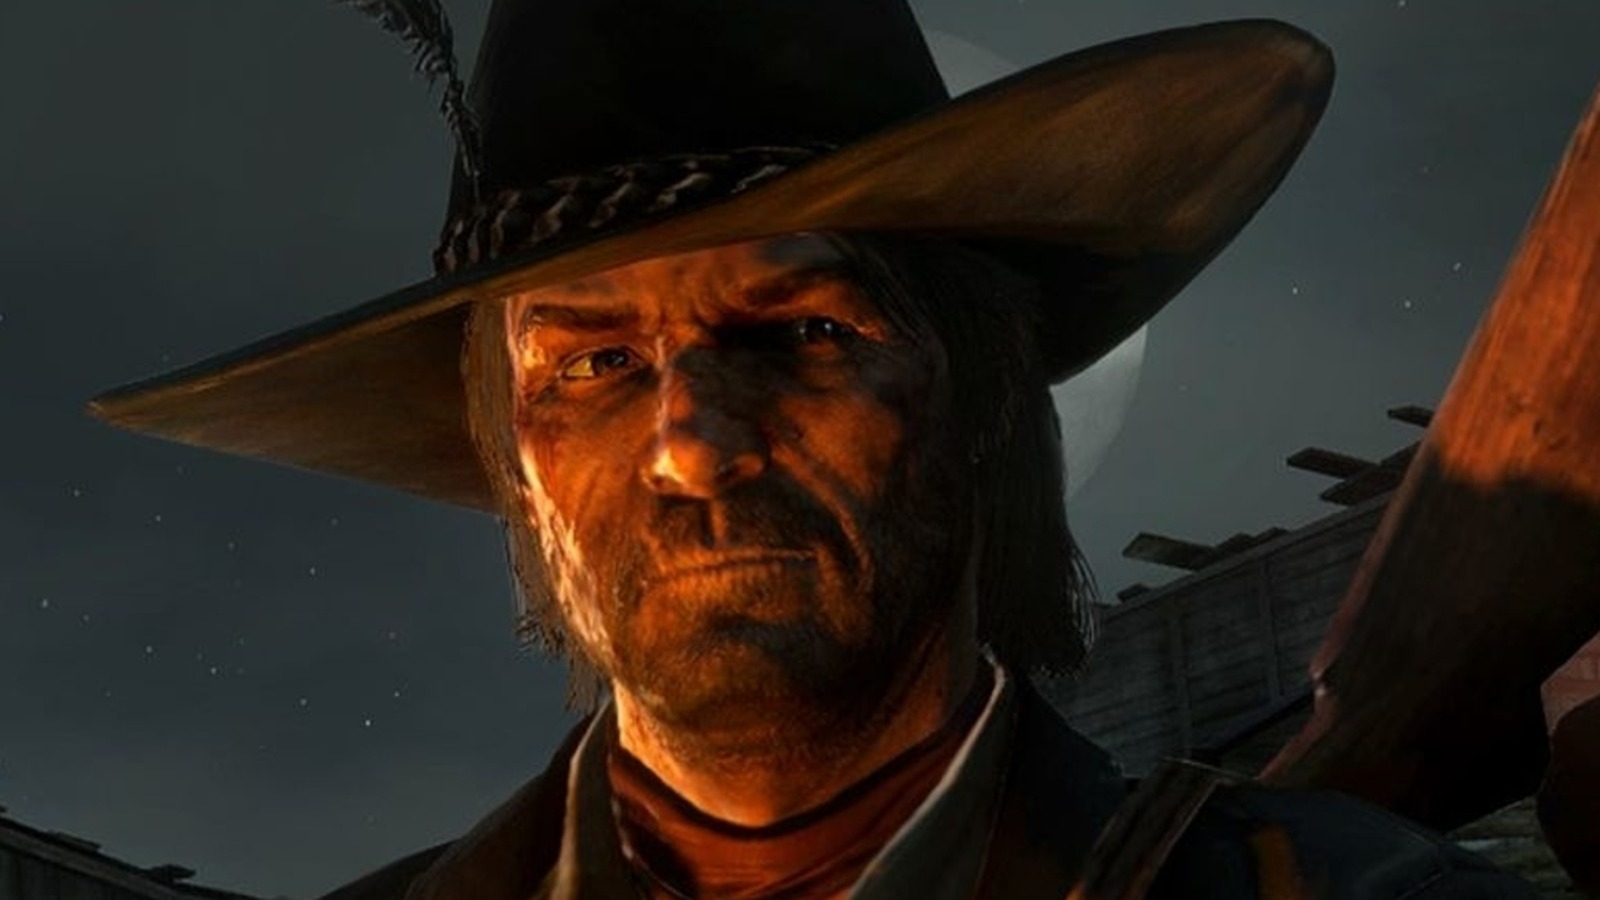 With all the rumours for the Red Dead Redemption remaster, how